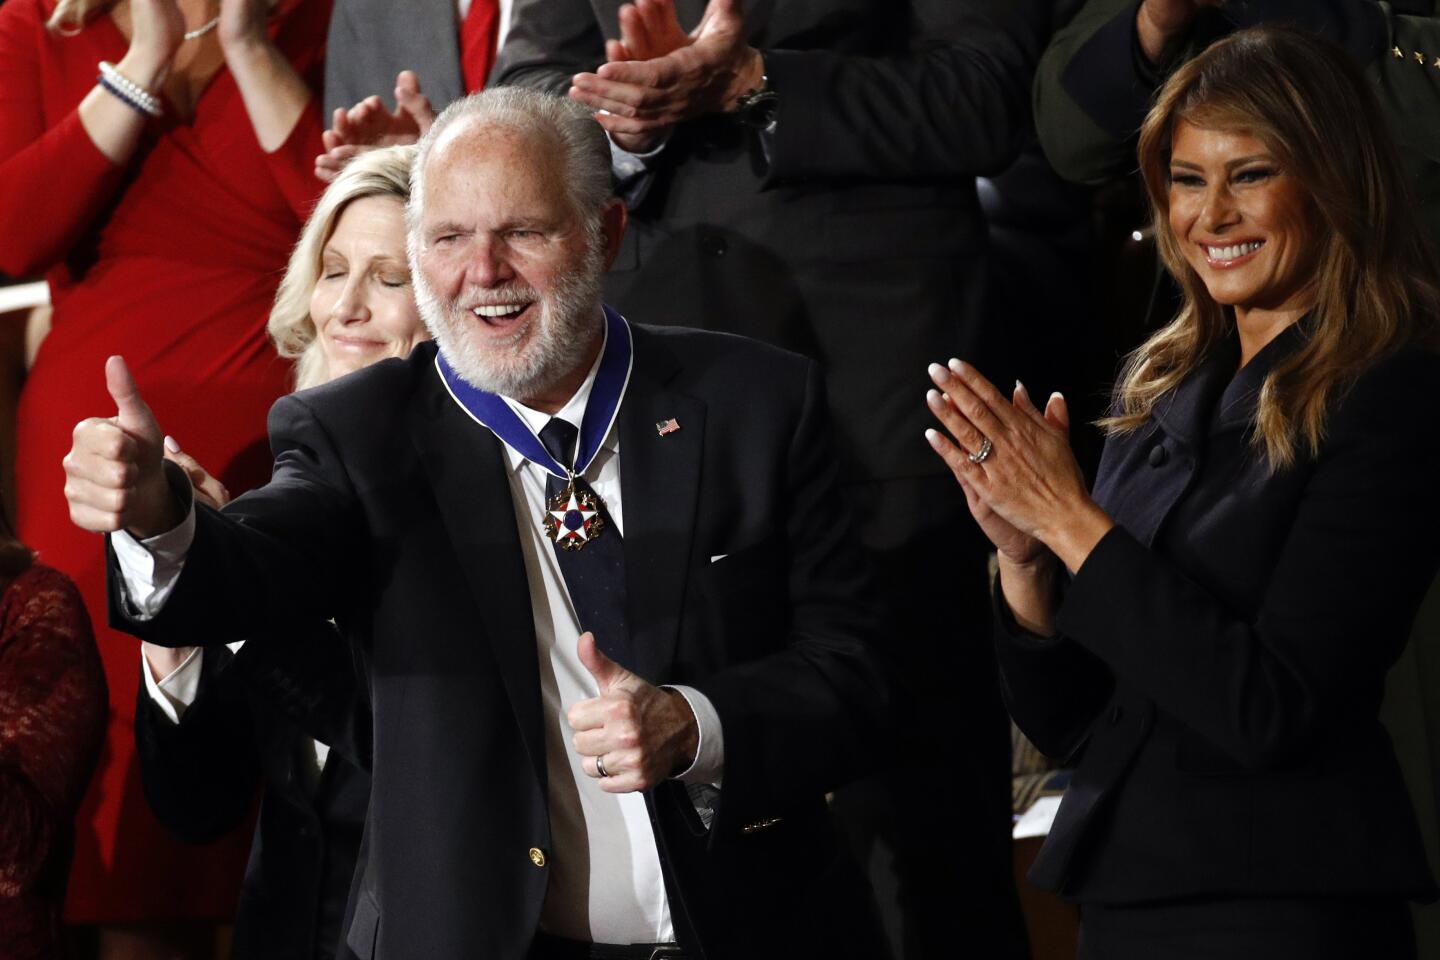 Rush Limbaugh, medal around his neck, holds both thumps up.